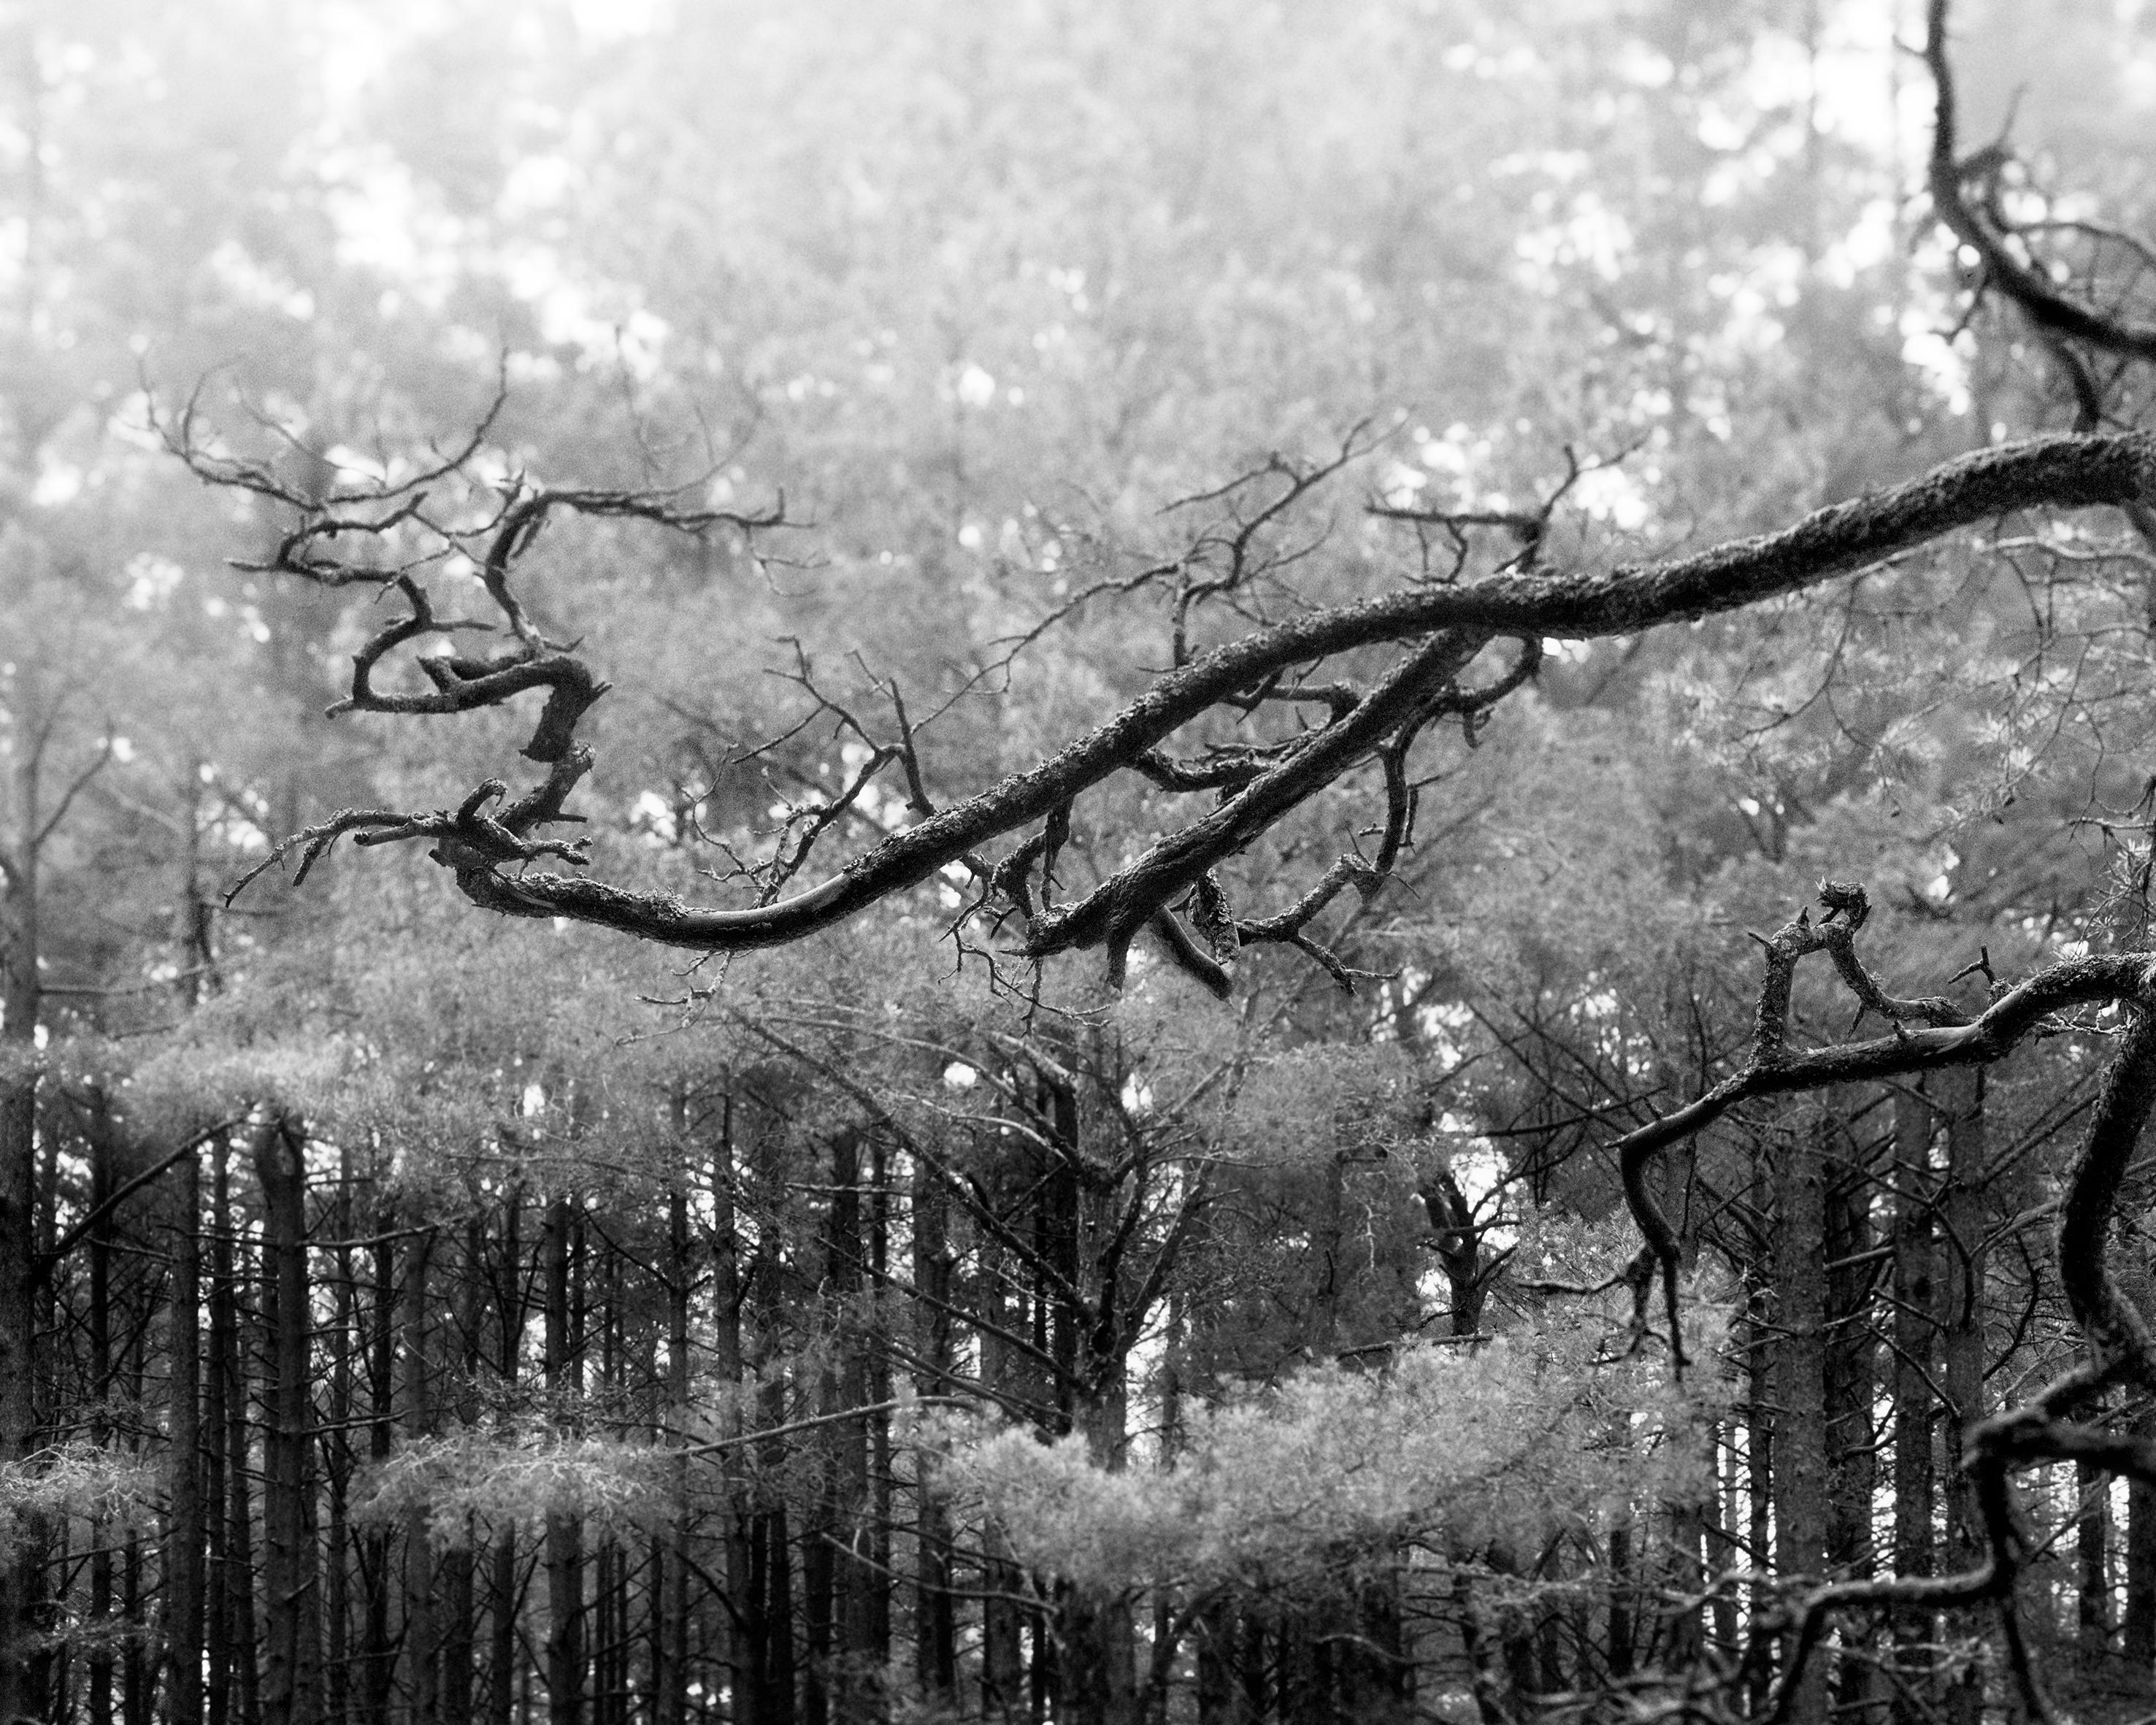 Ugne Pouwell Black and White Photograph - Baltic pine - analogue black and white forest photography, Limited edition of 10